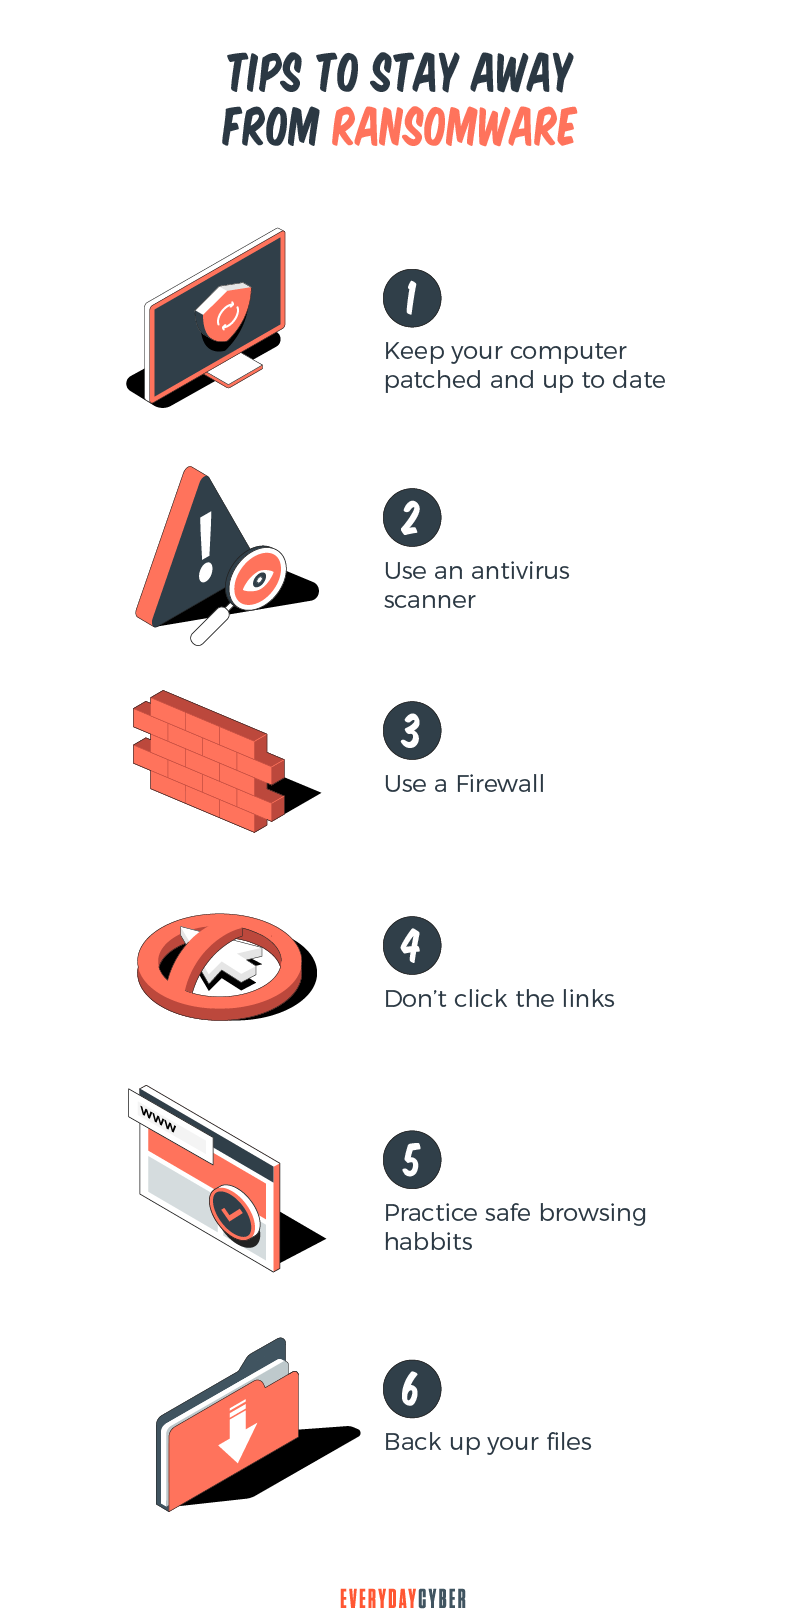 Tips to stay away from ransomware